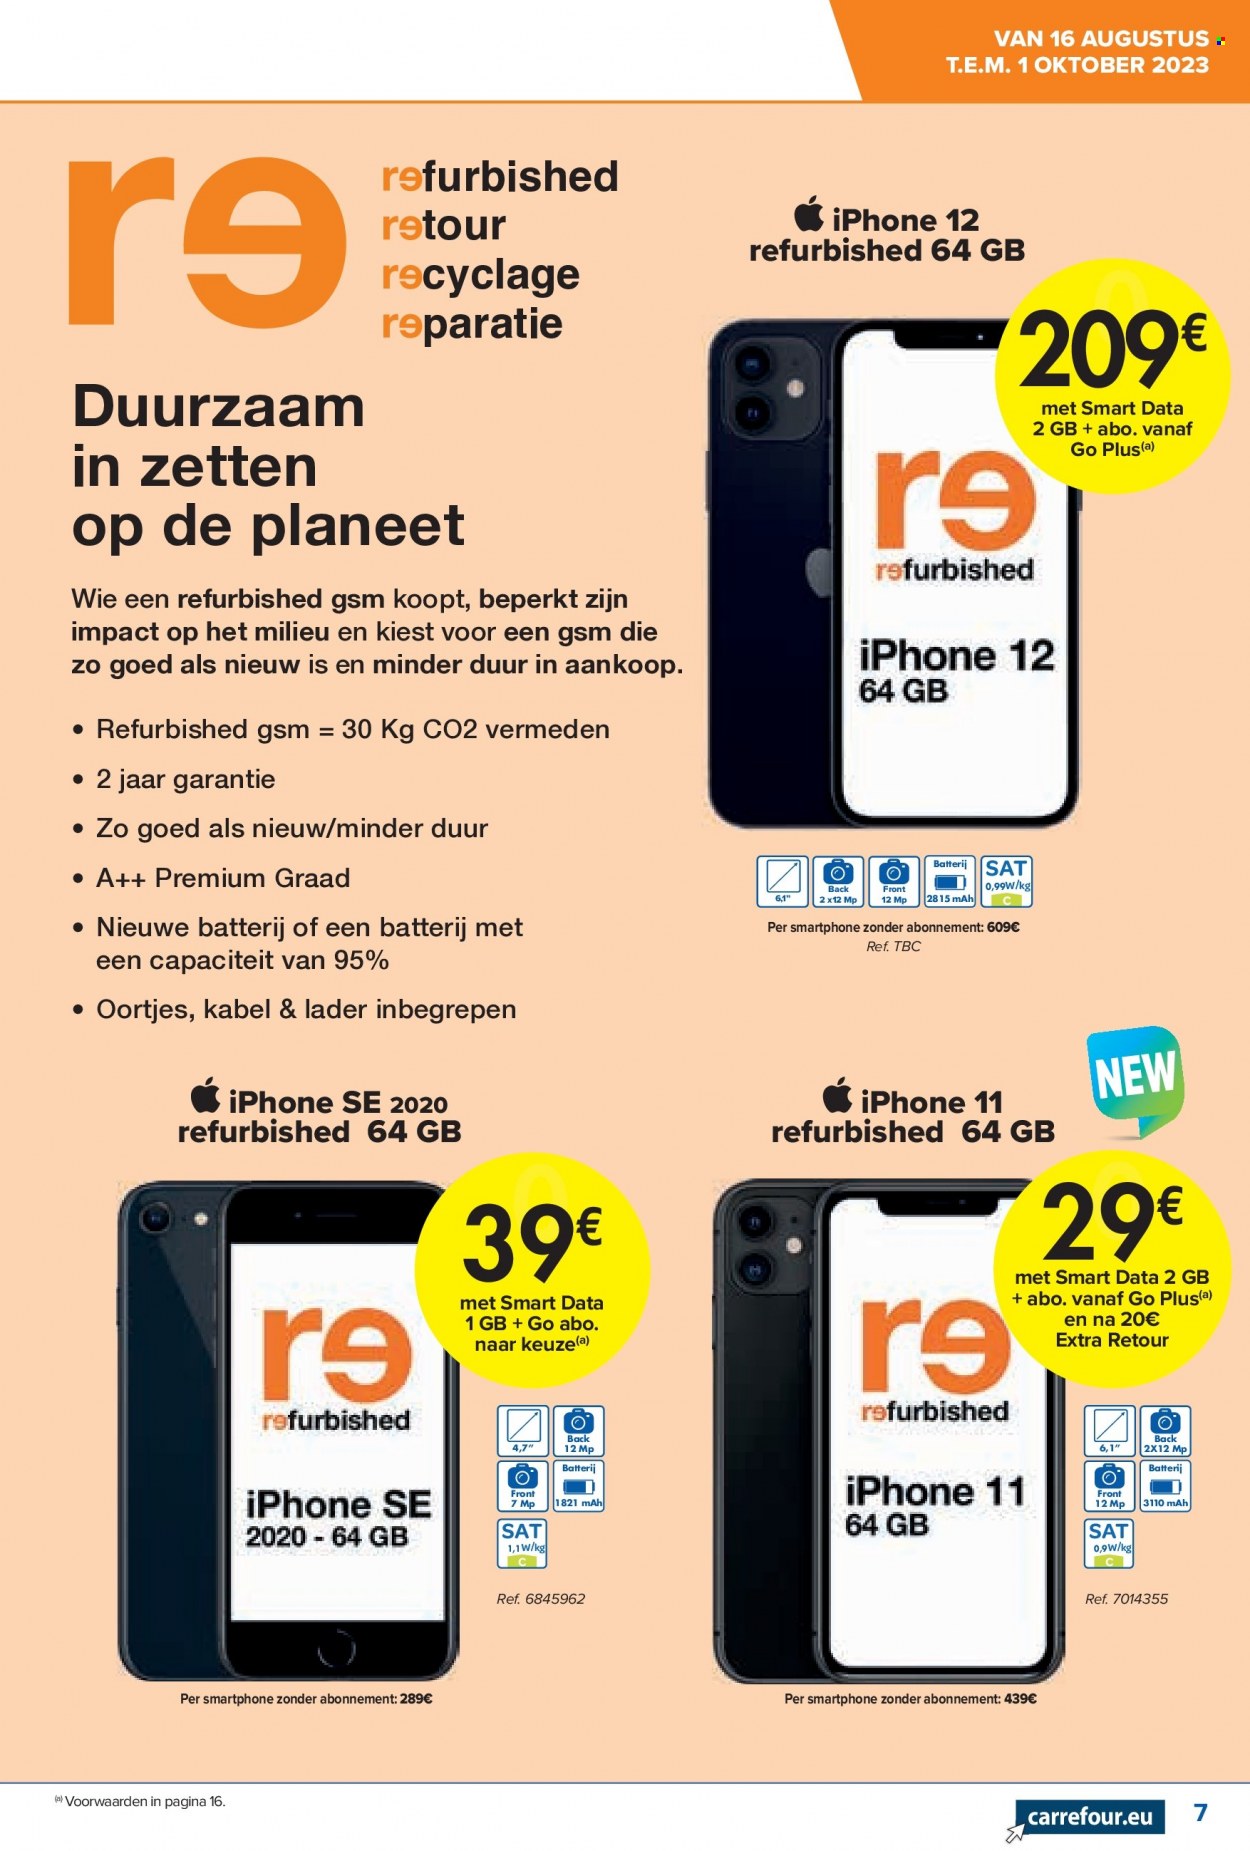 Catalogue Carrefour hypermarkt - 16.8.2023 - 1.10.2023. Page 7.